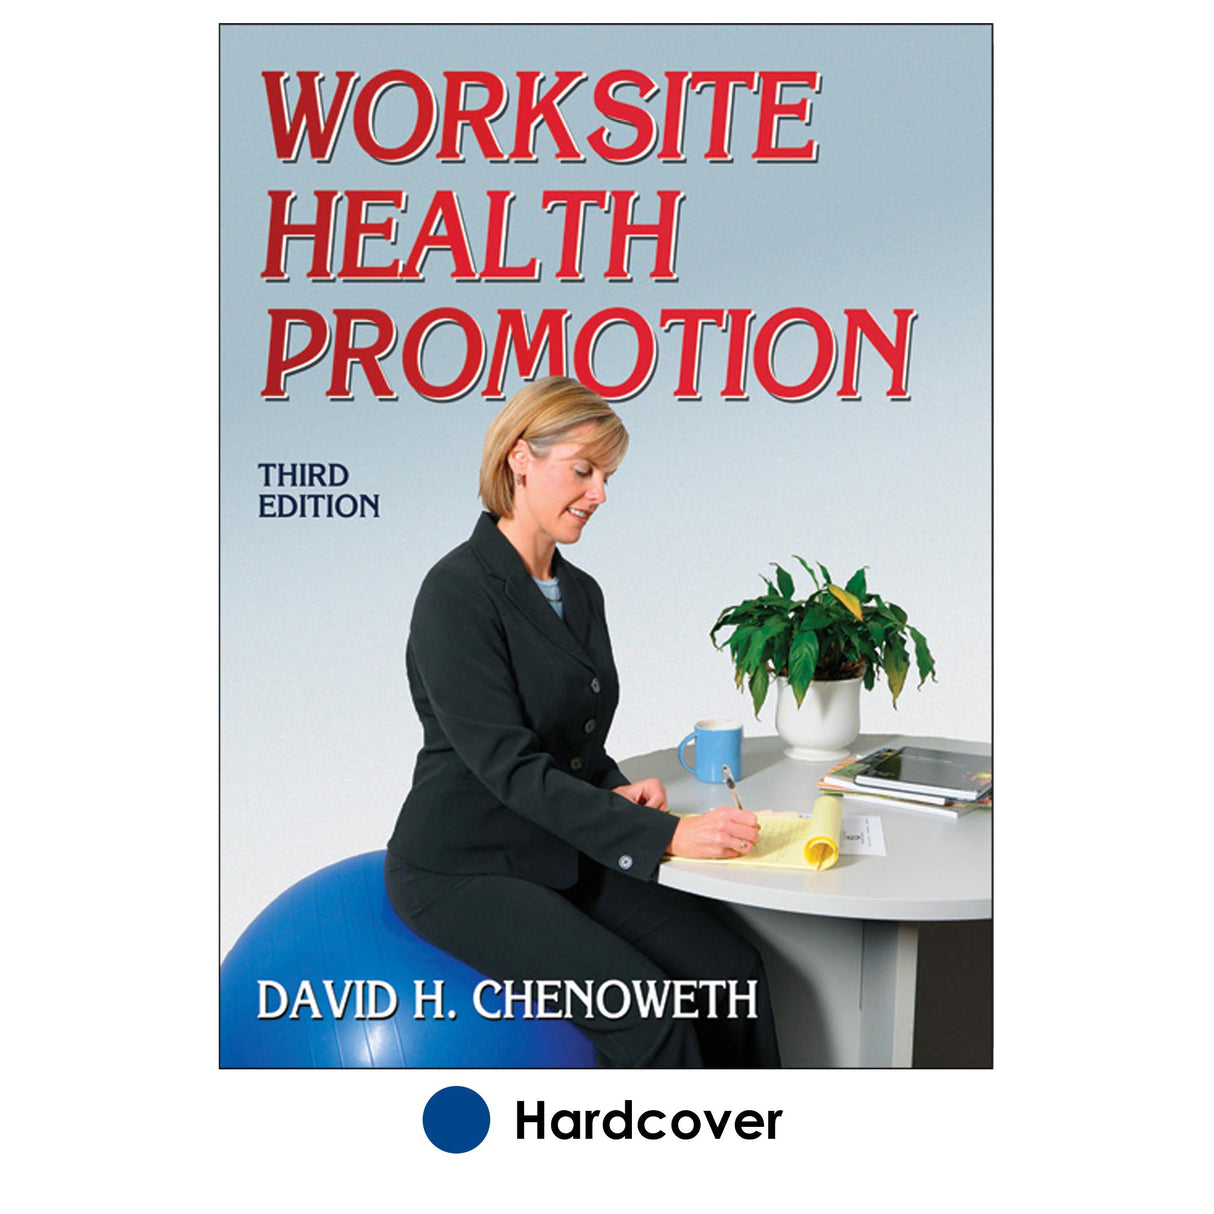 Worksite Health Promotion - 3rd Edition